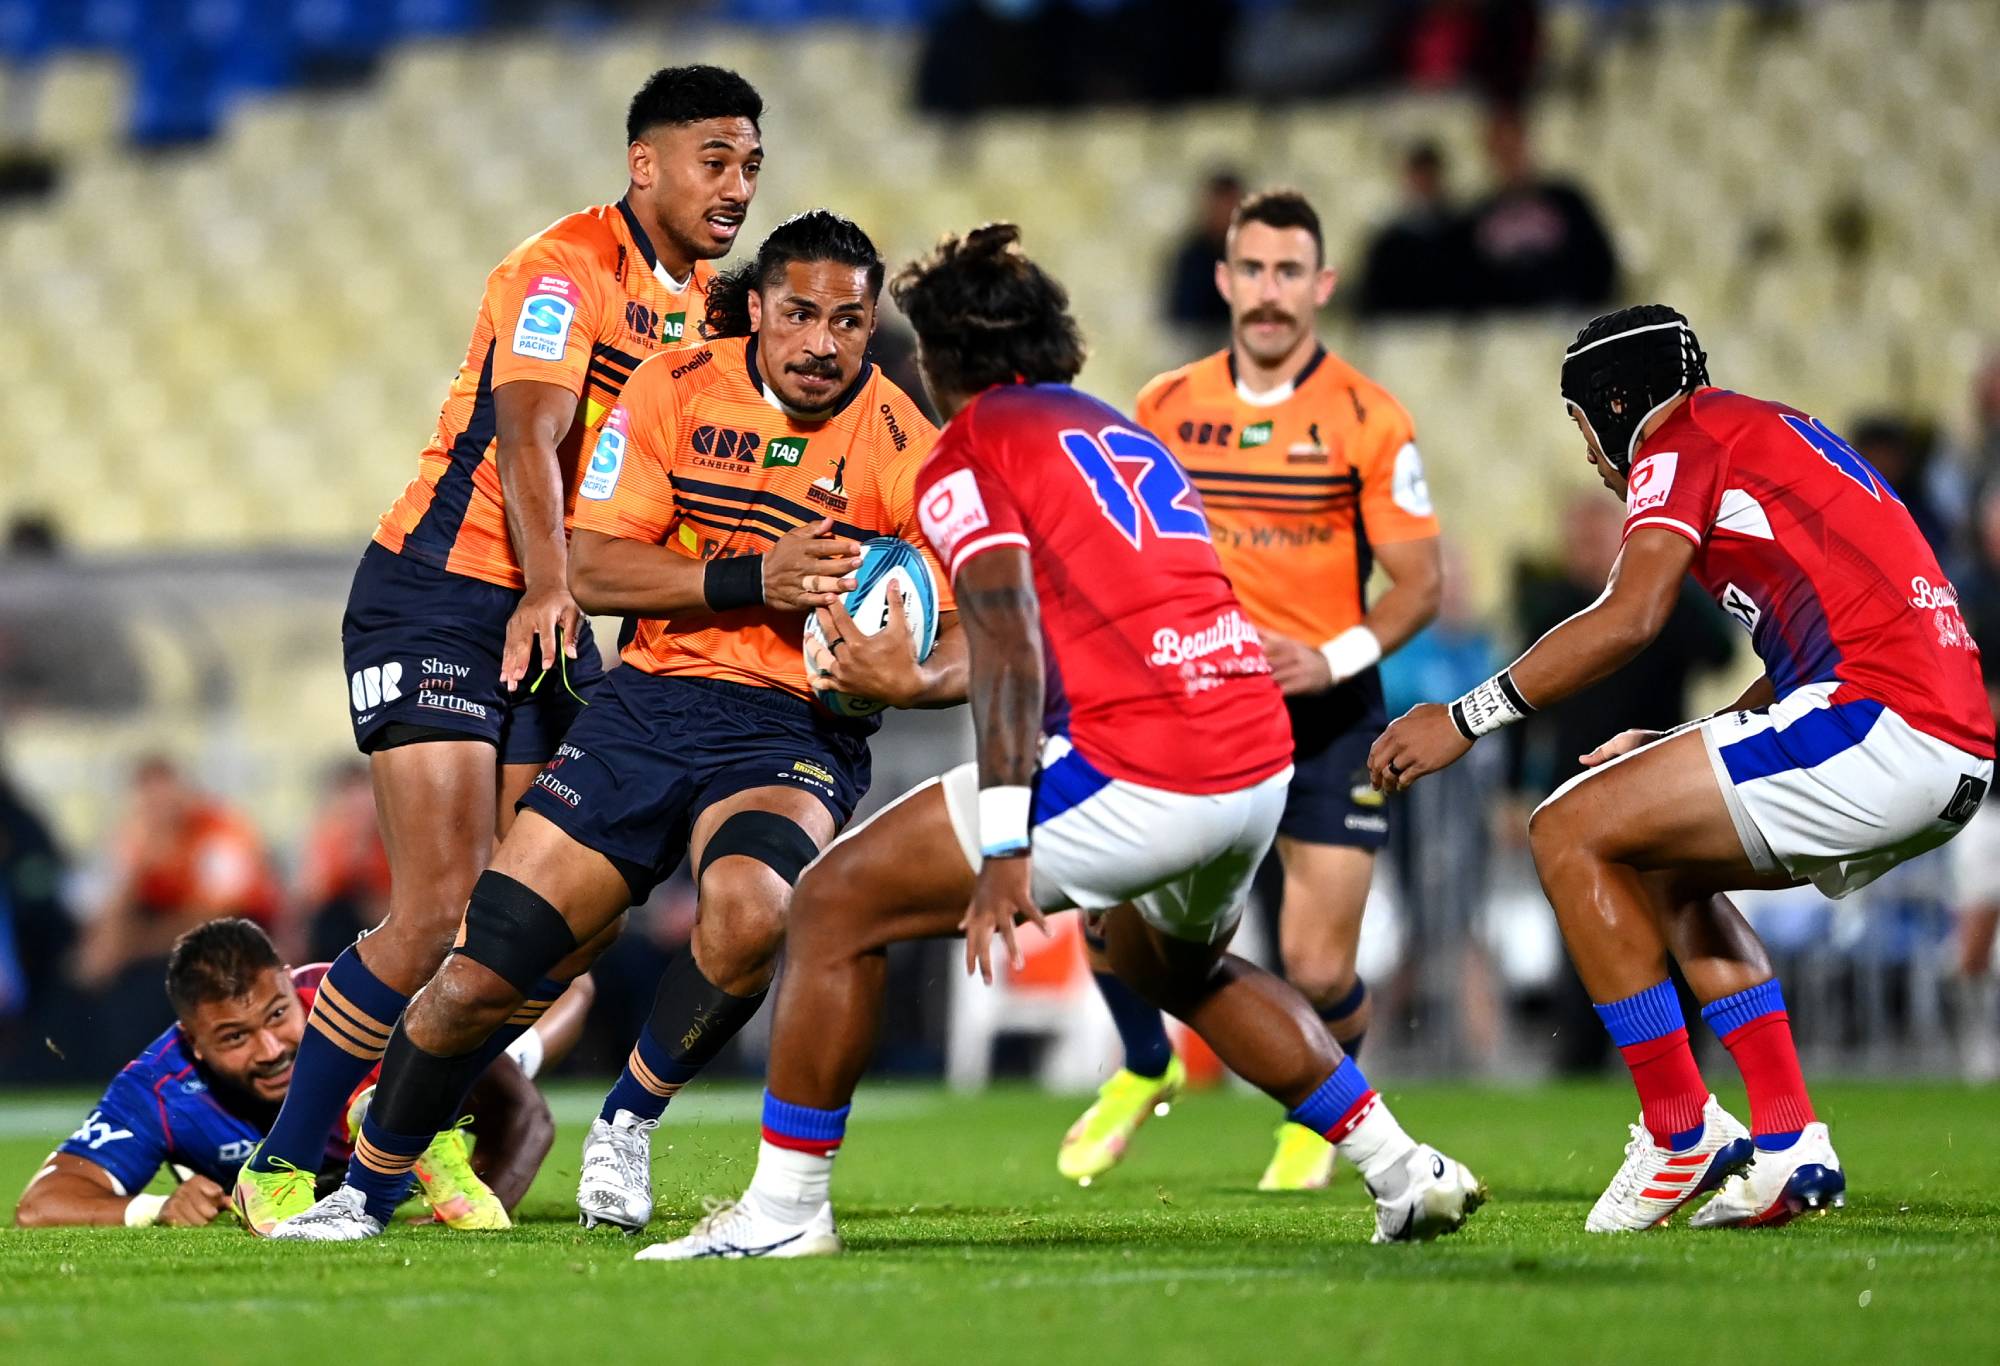 Pete Samu of the Brumbies charges forward during the round 15 Super Rugby Pacific match between the Moana Pasifika and the ACT Brumbies at Mt Smart Stadium on May 28, 2022 in Auckland, New Zealand. (Photo by Hannah Peters/Getty Images)